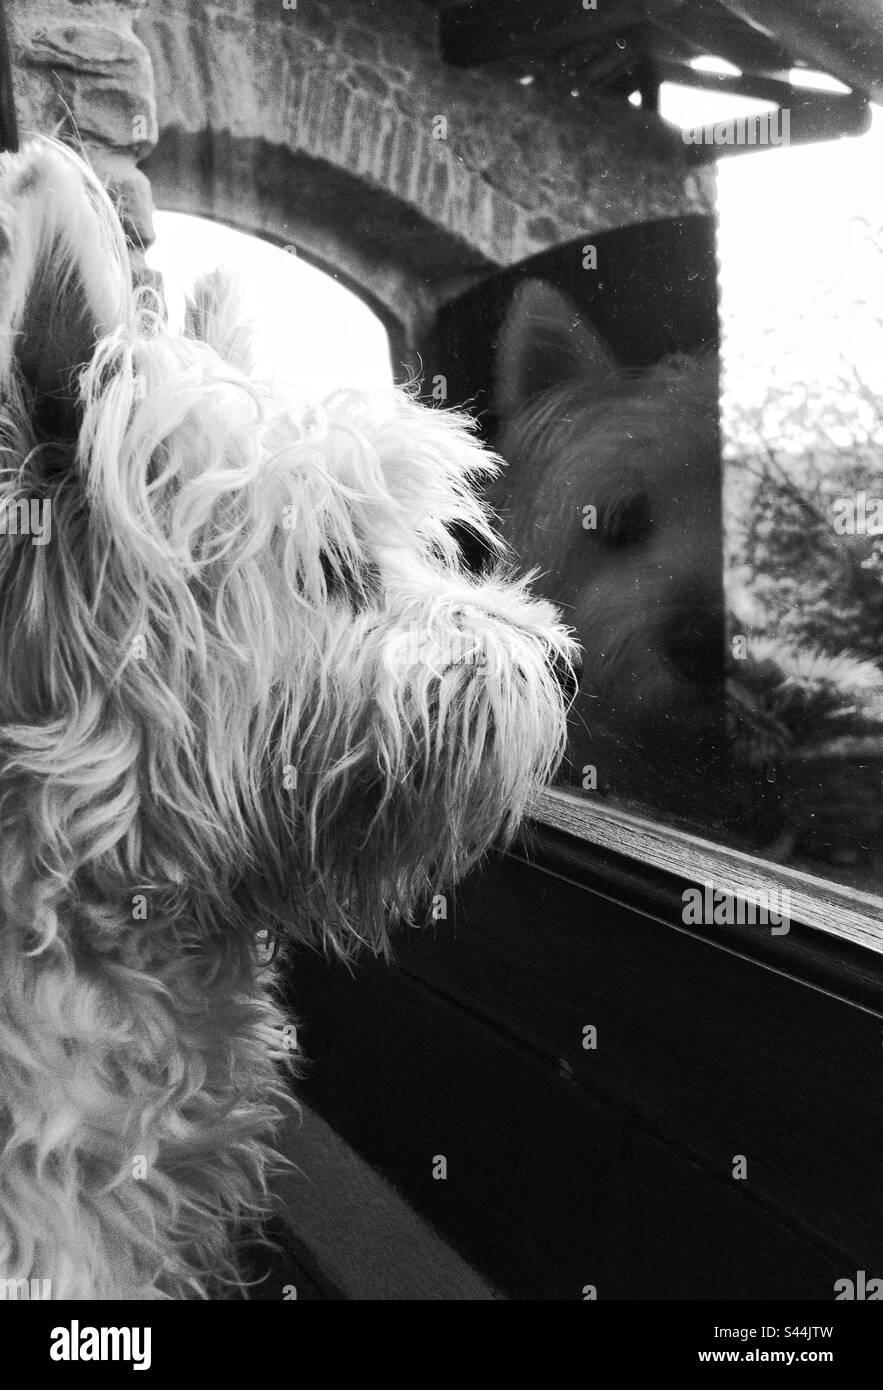 Black & white capture of a West Highland Terrier dog looking through the window Stock Photo